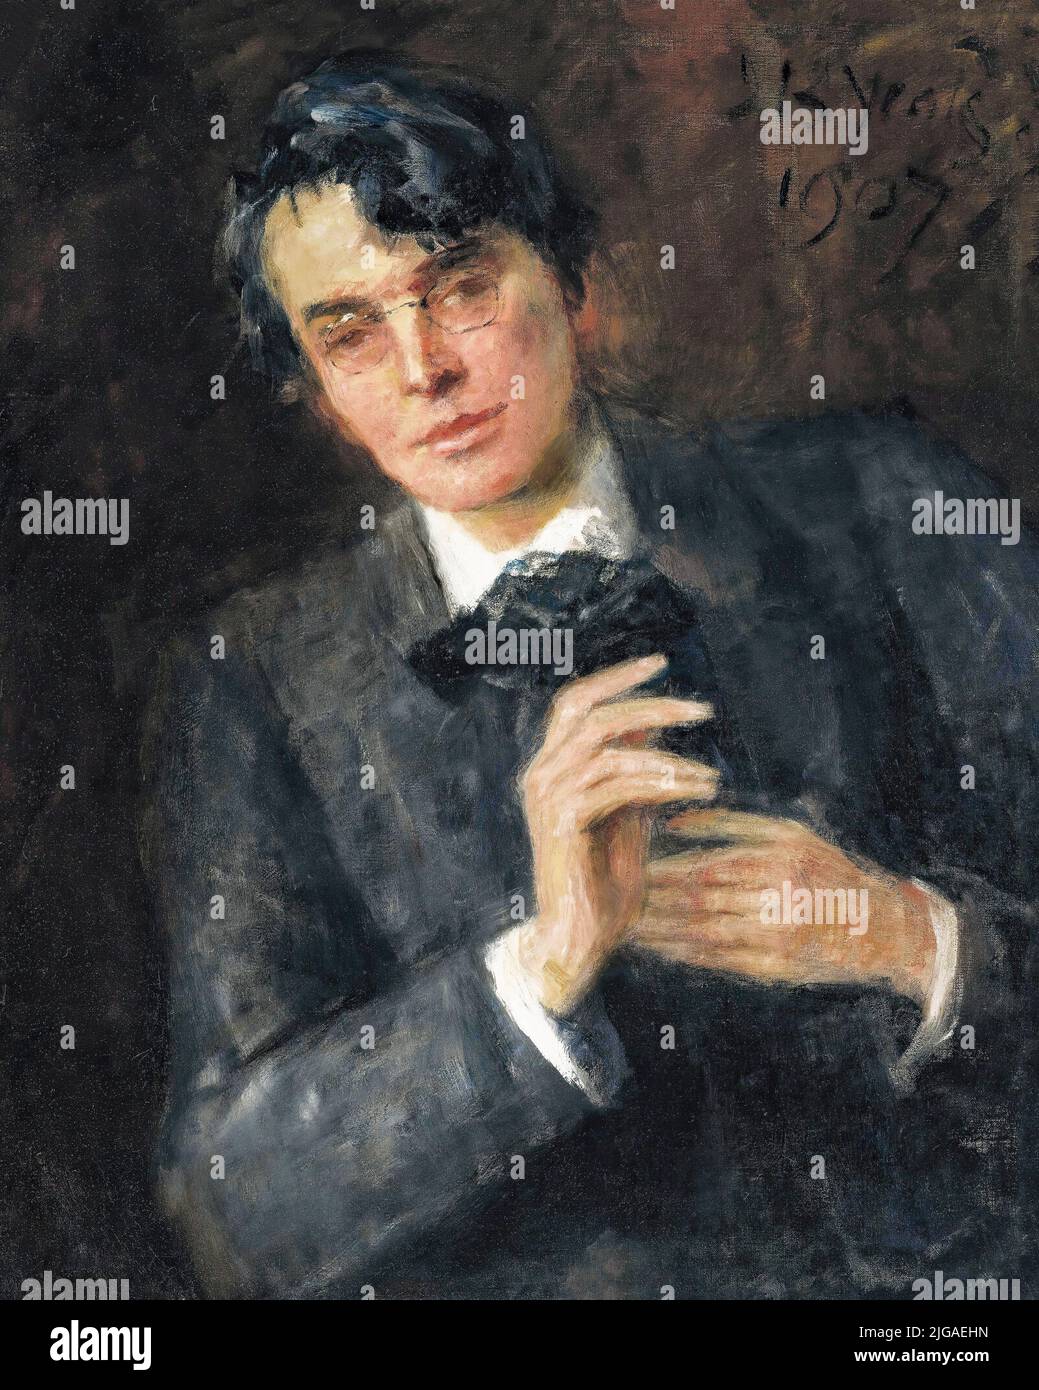 A portrait of William Butler Yeats (1865-1939), by his father, John Butler Yeats. A  Protestant of Anglo-Irish descent, Irish poet, dramatist, writer and one of the foremost figures of 20th-century literature. He was a driving force behind the Irish Literary Revival and became a pillar of the Irish literary establishment who helped to found the Abbey Theatre. In his later years he served two terms as a Senator of the Irish Free State. Stock Photo